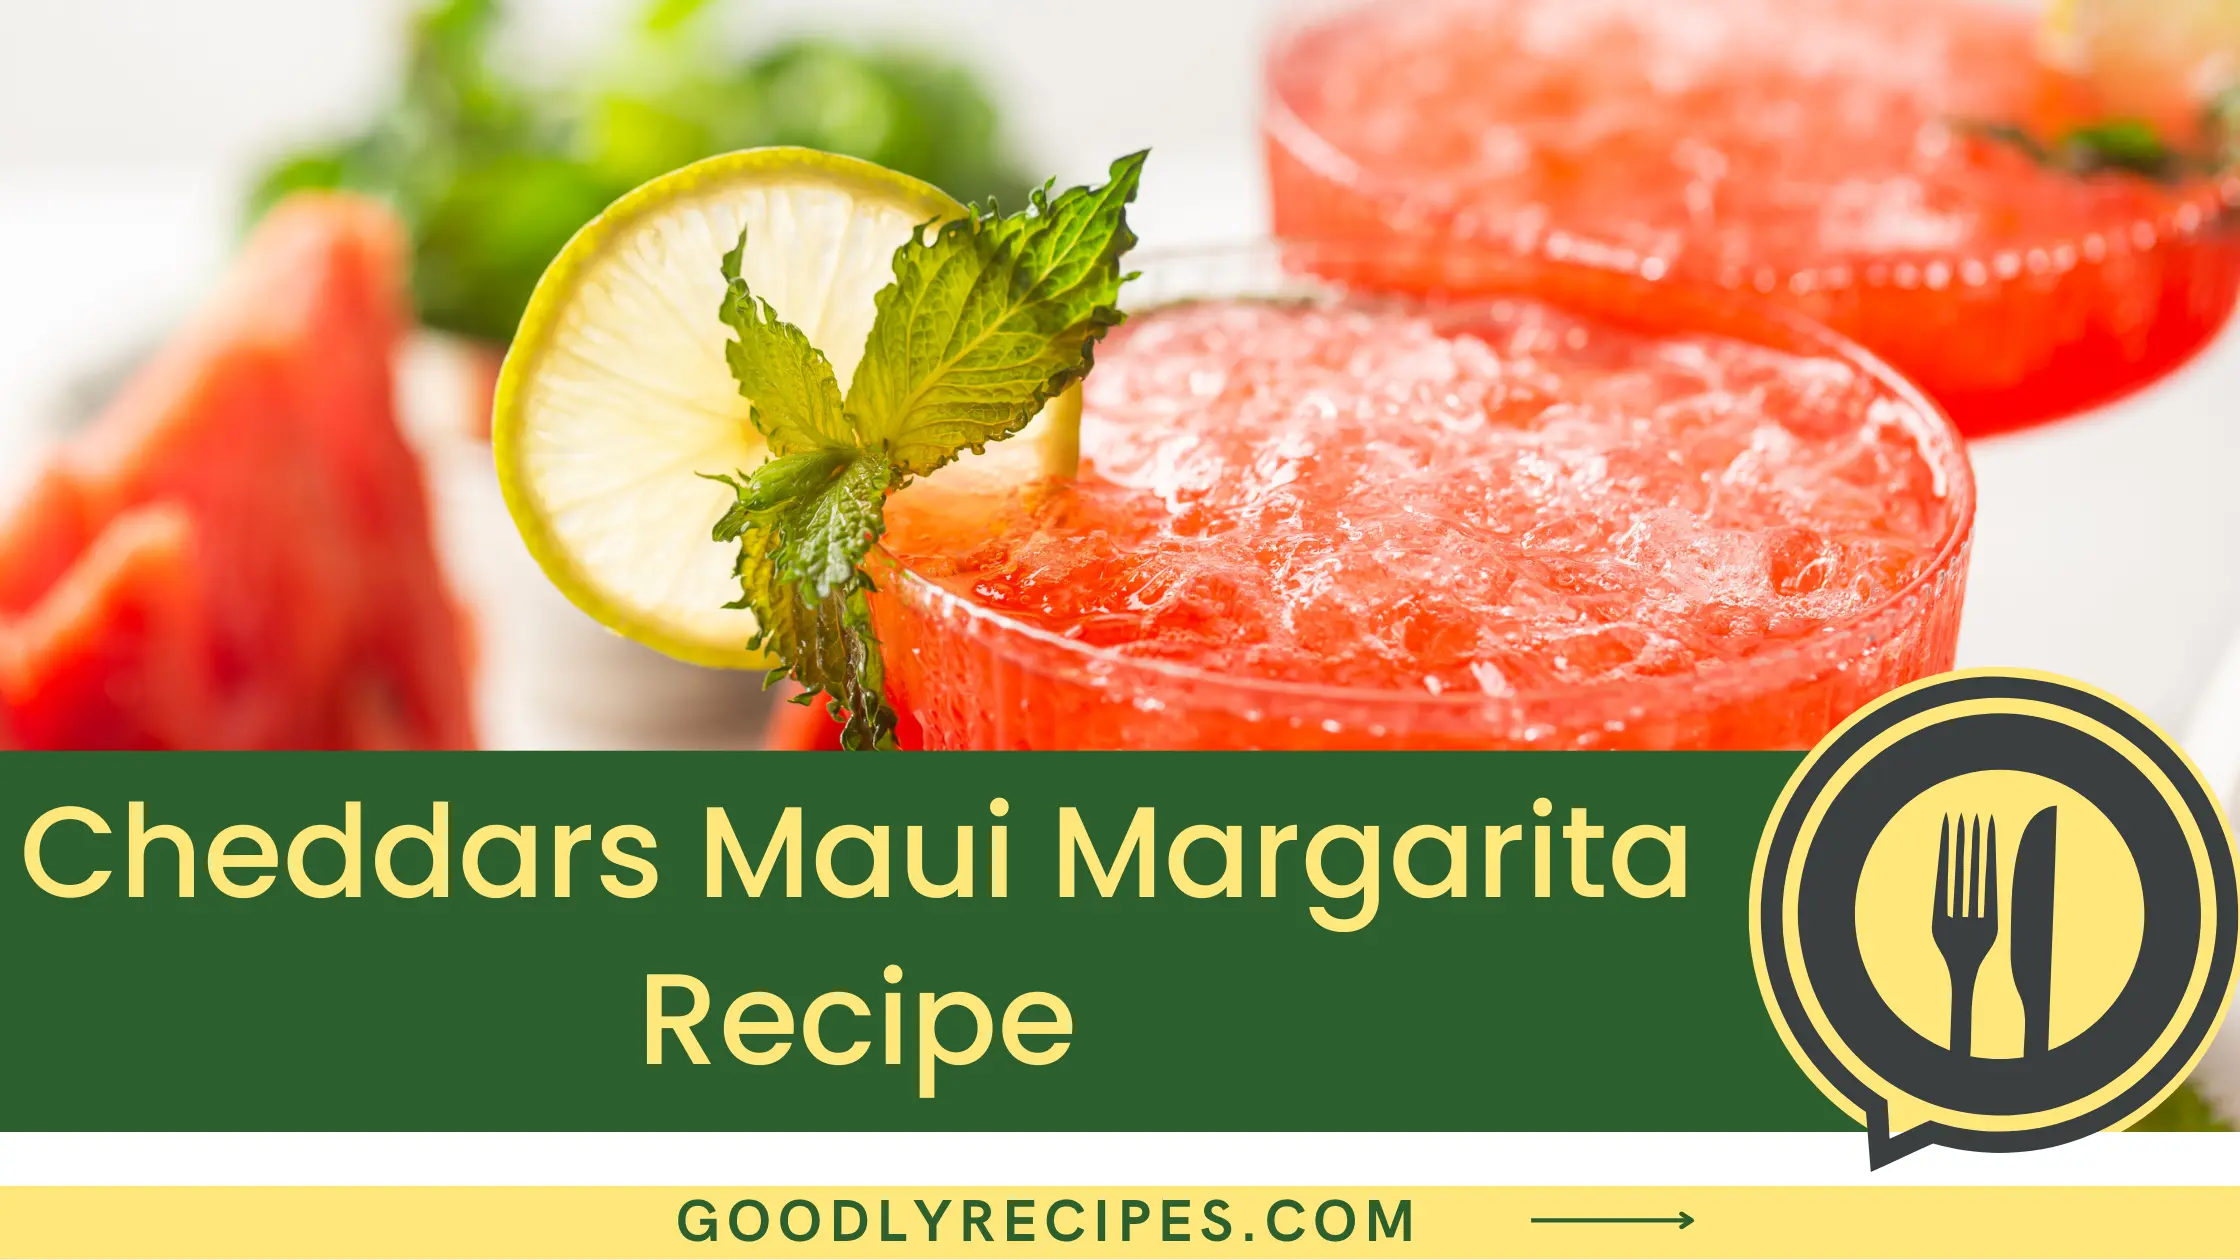 Cheddars Maui Margarita Recipe - For Food Lovers